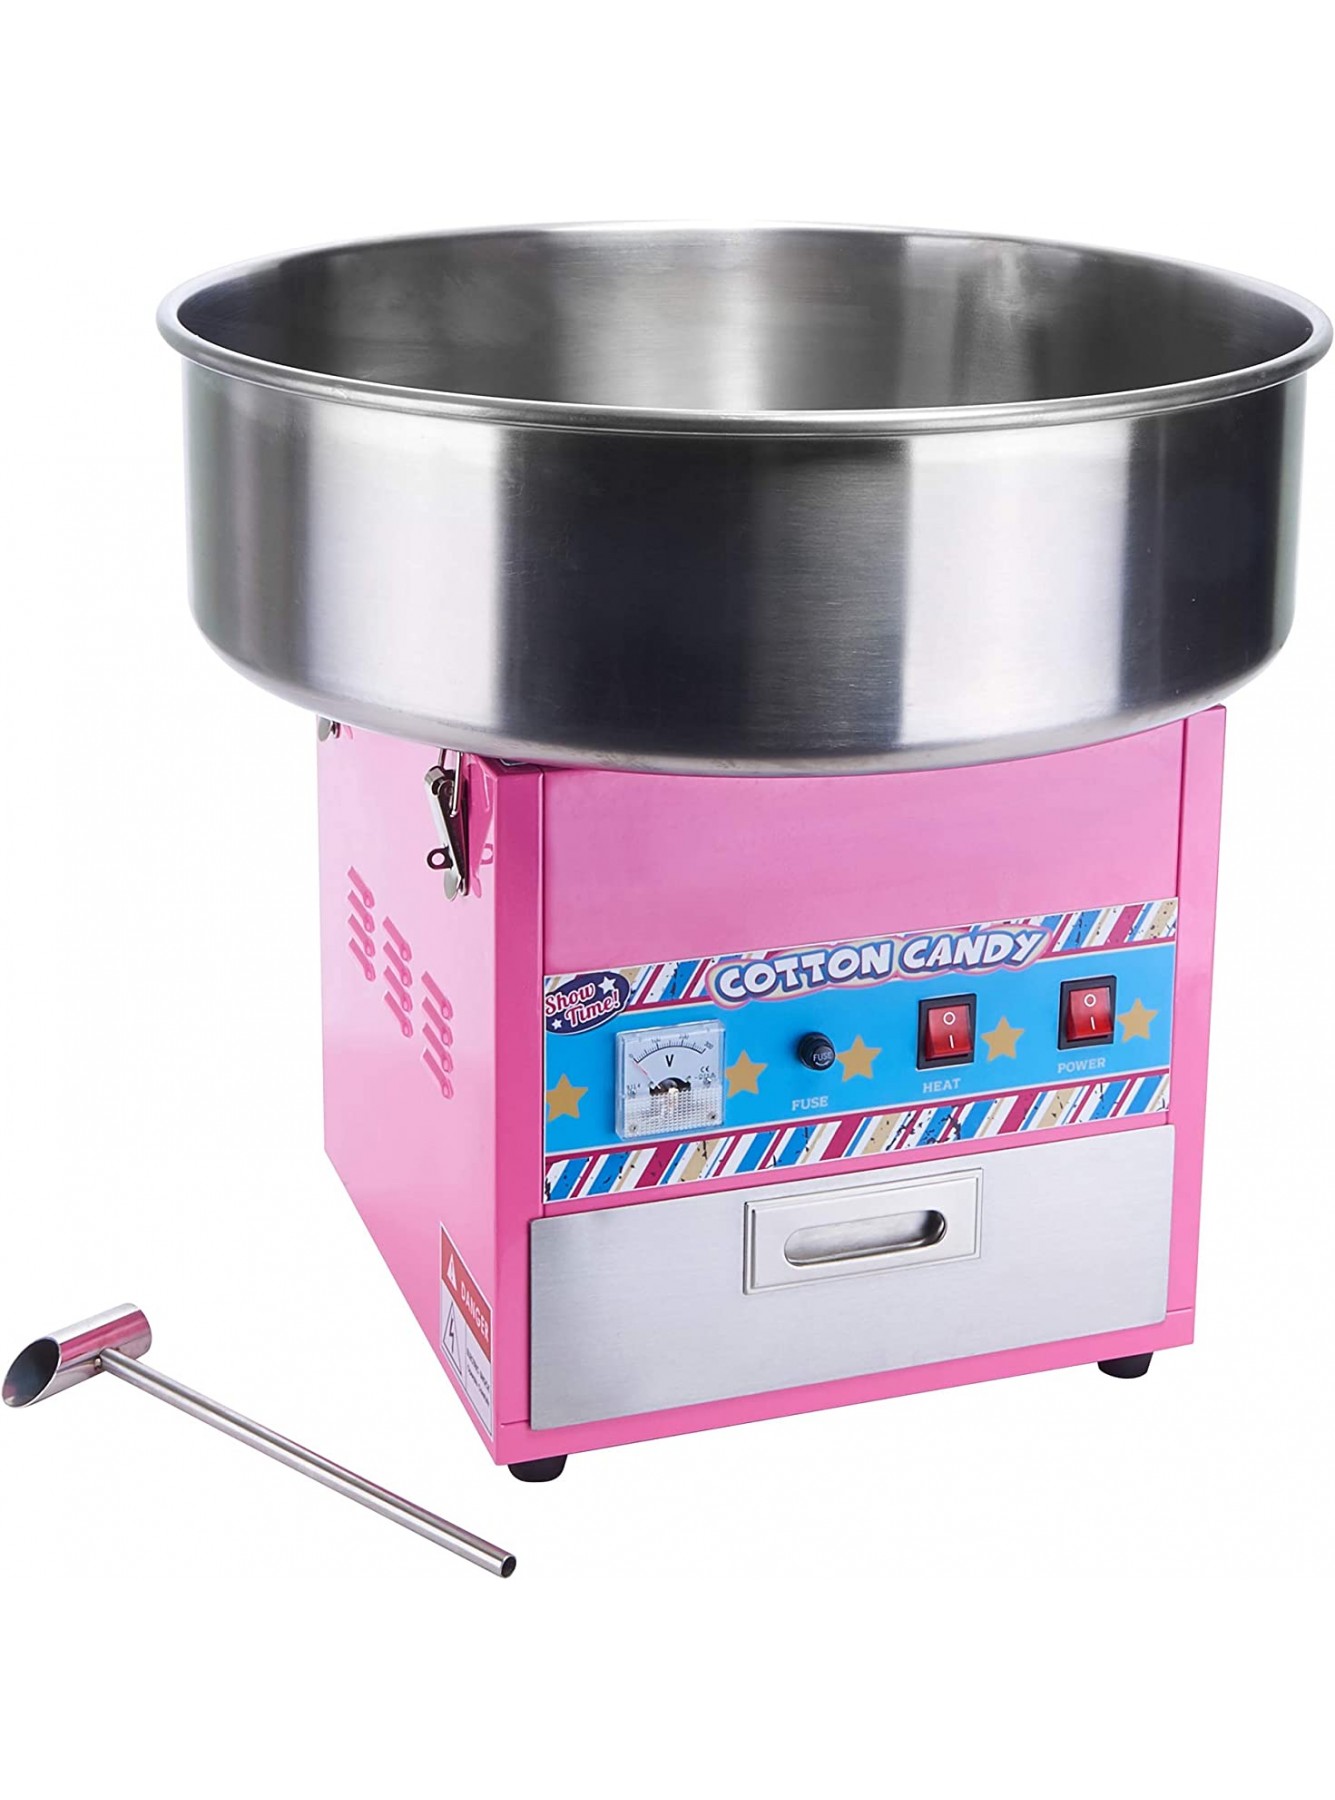 Winco CCM-28 Show Time Electric Cotton Candy Machine With 20.5'' Stainless Steel Bowl 1080W Cotton Candy Maker B07GK8ZDQ2